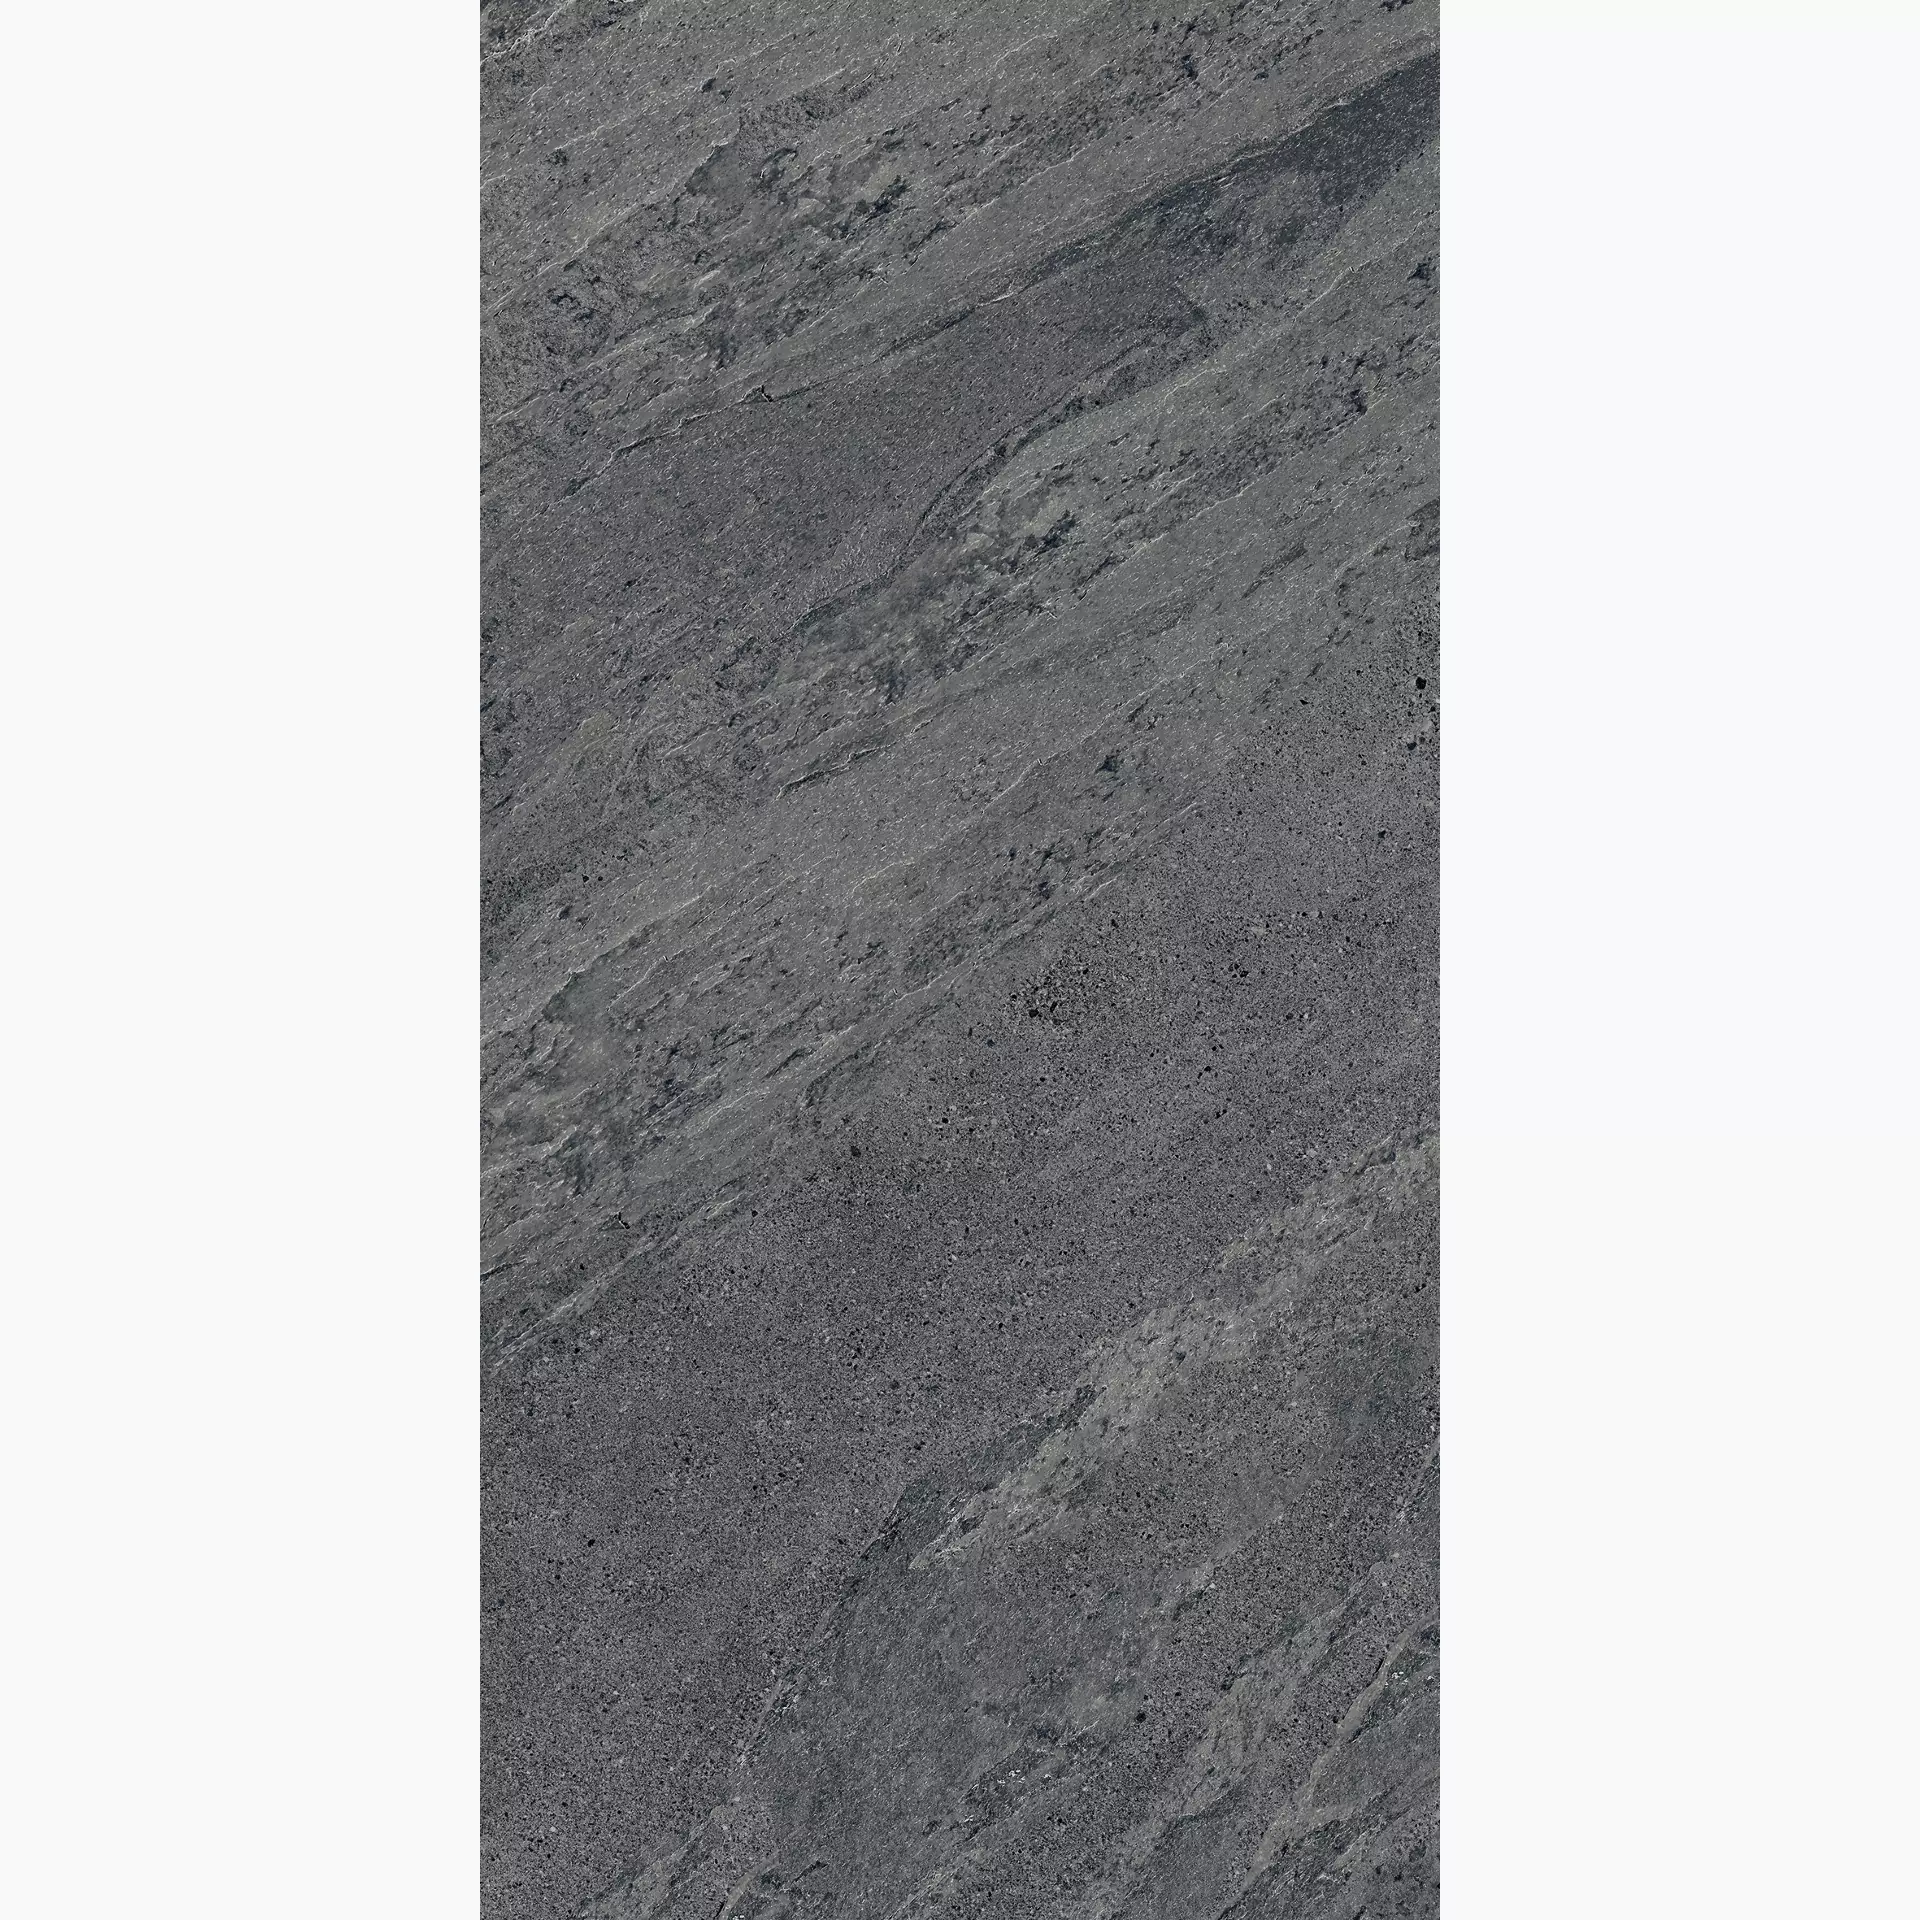 Keope Ubik Anthracite Strutturato 46473149 30x60cm rectified 9mm